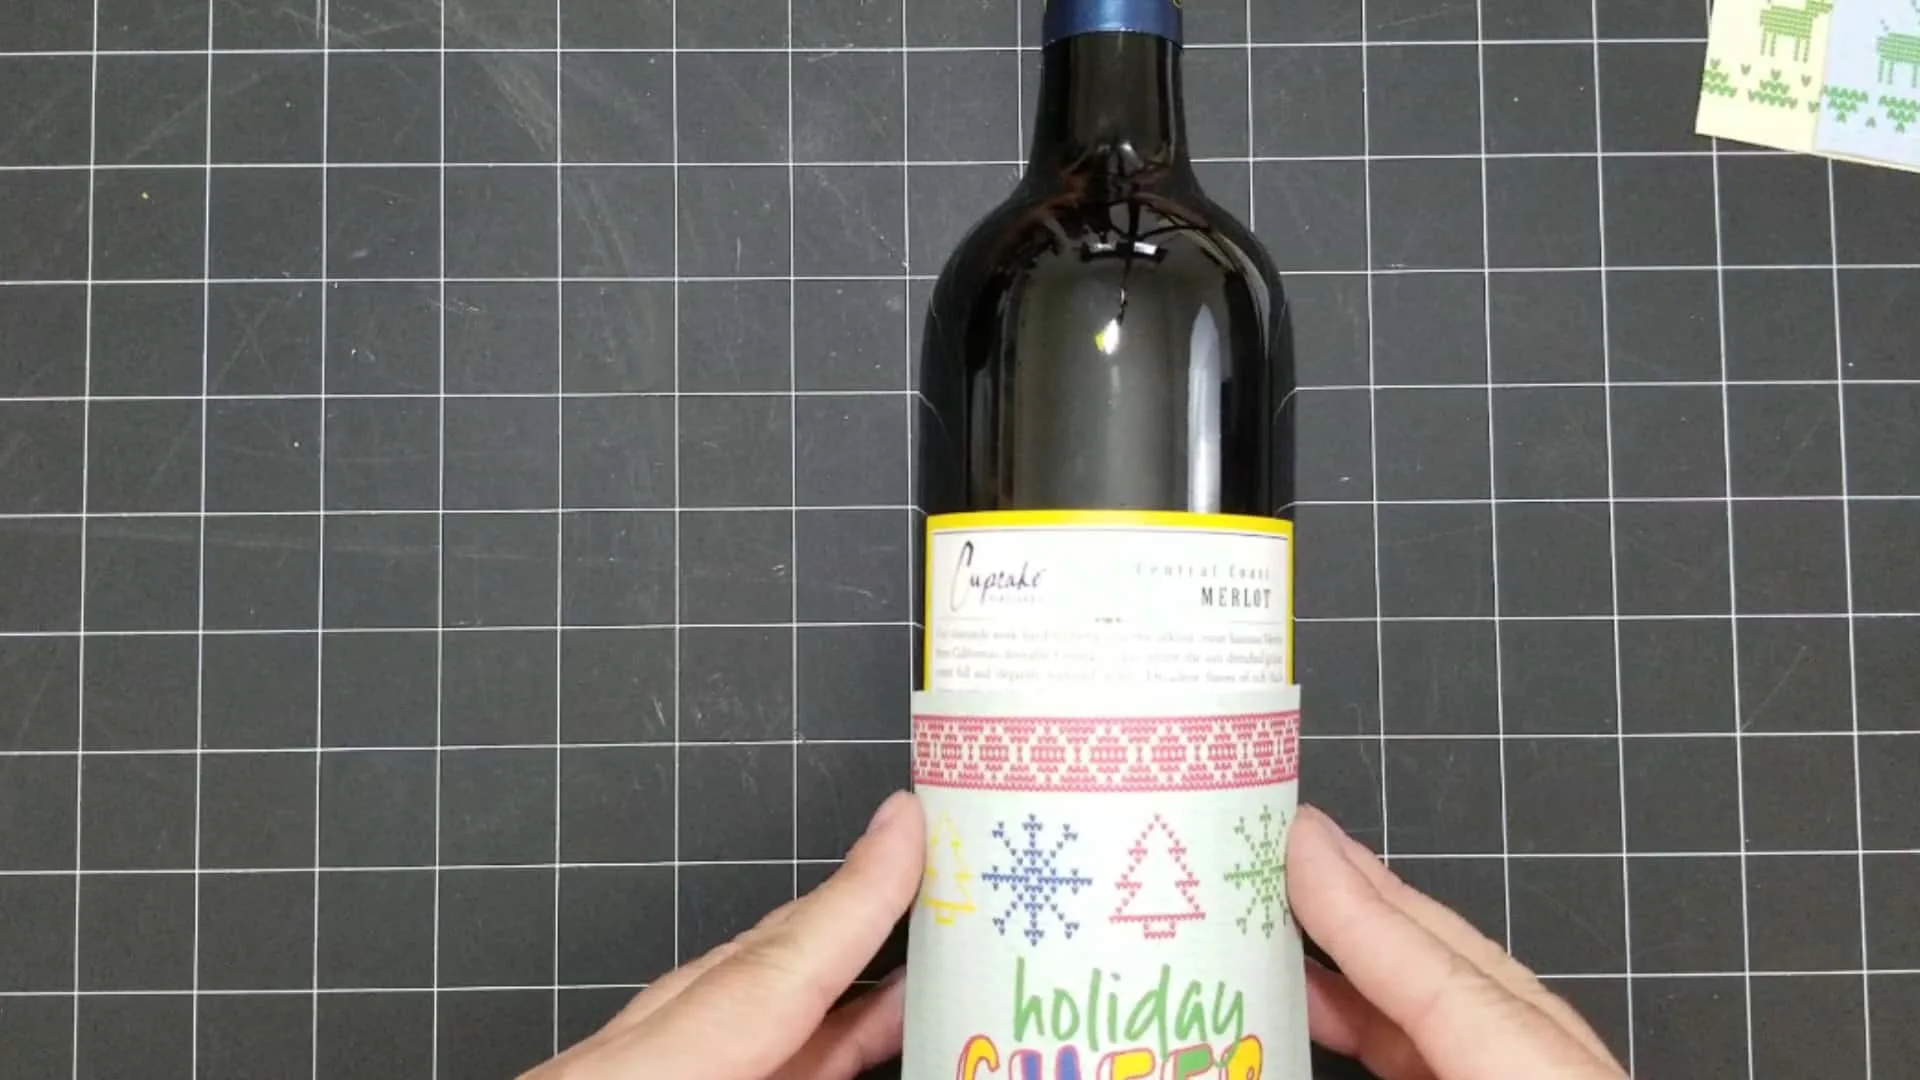 Figuring out just where to place the holiday wine label onto the bottle.